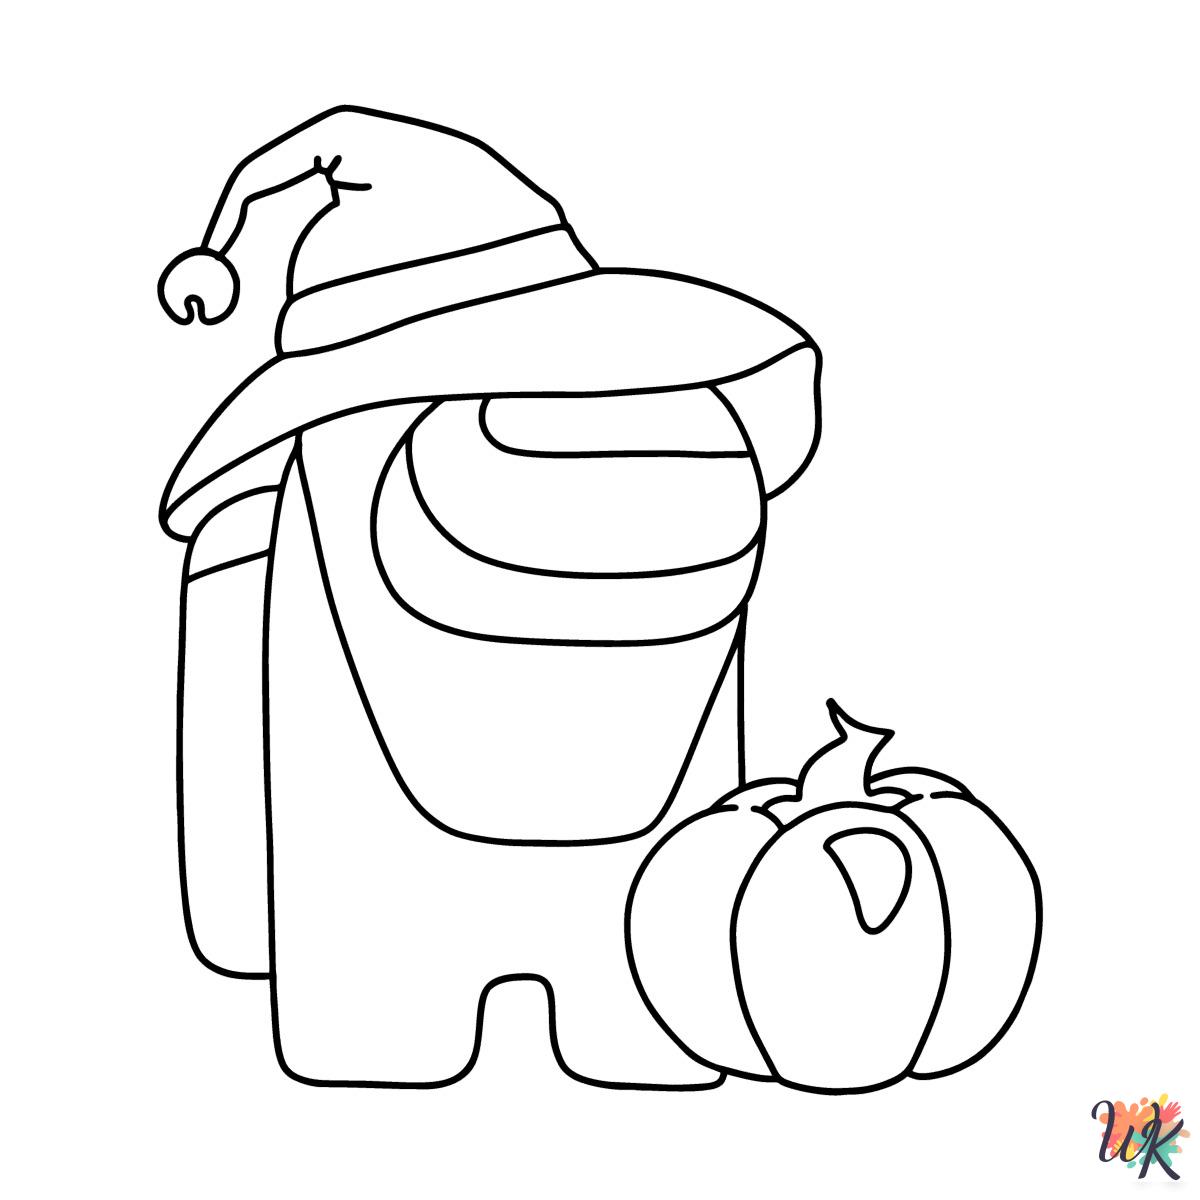 Among Us Christmas coloring pages free